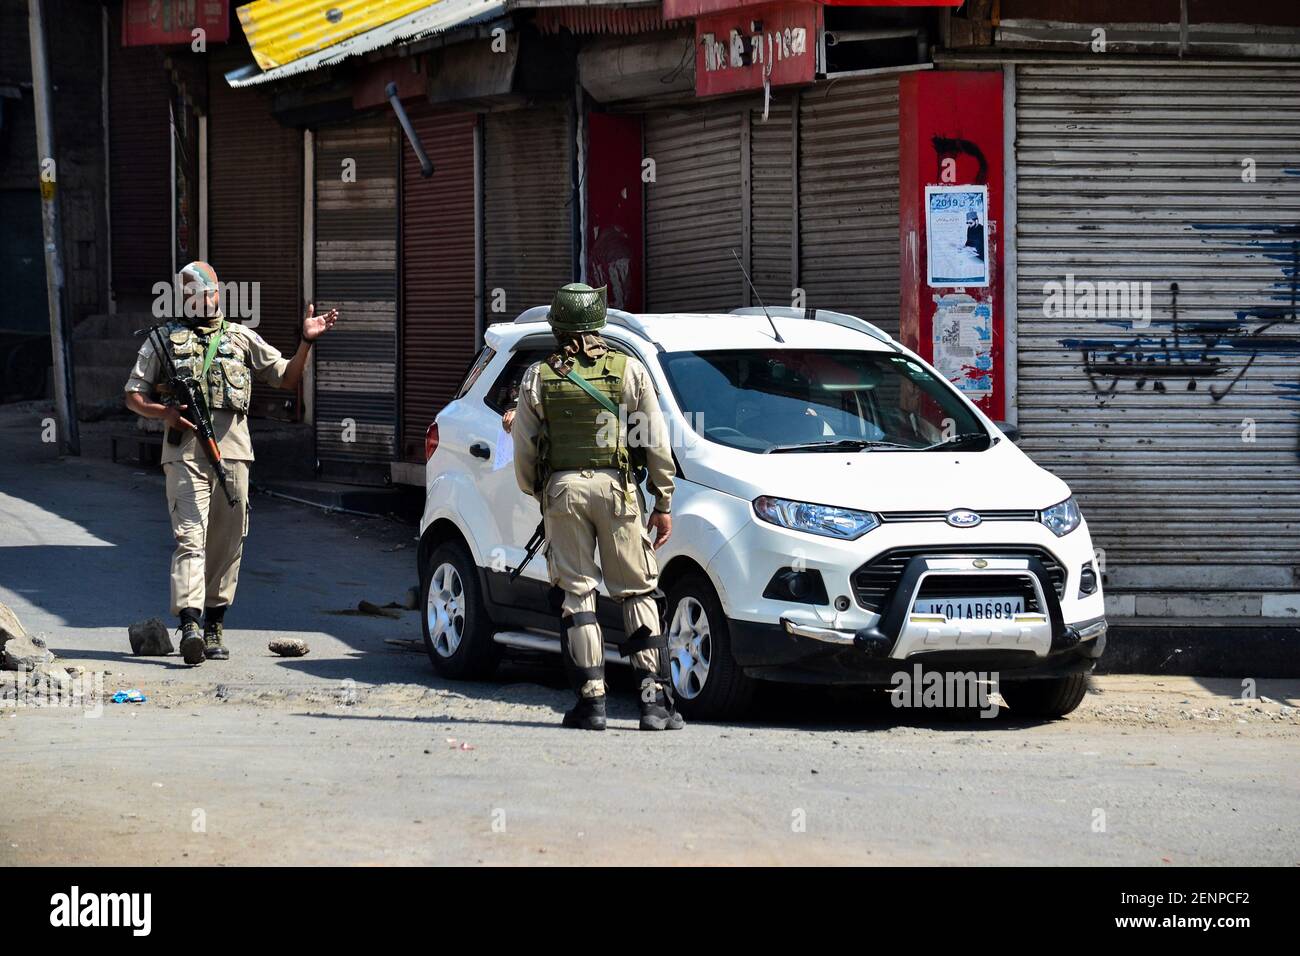 Paramilitary troopers stop a vehicle during restrictions in Srinagar, Kashmir. Kashmir valley remained shut for the 40th consecutive day following the scrapping of Article 370 by the central government which grants special status to Jammu & Kashmir. (Photo by Saqib Majeed / SOPA Images/Sipa USA) Stock Photo